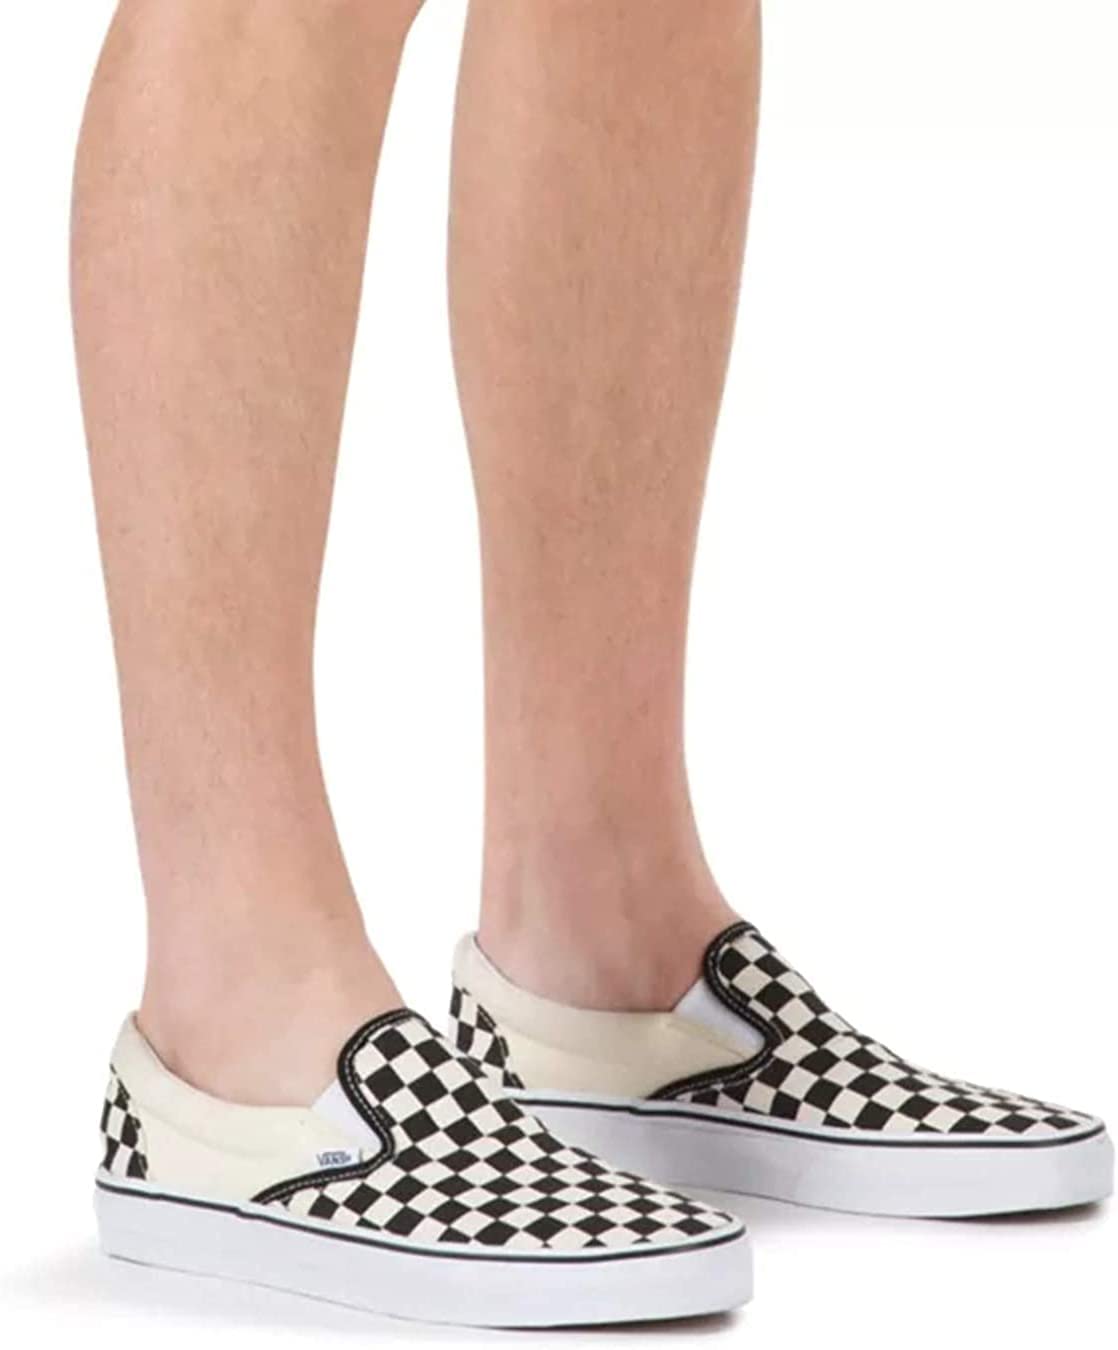 Vans Men's for Leisure and Sports